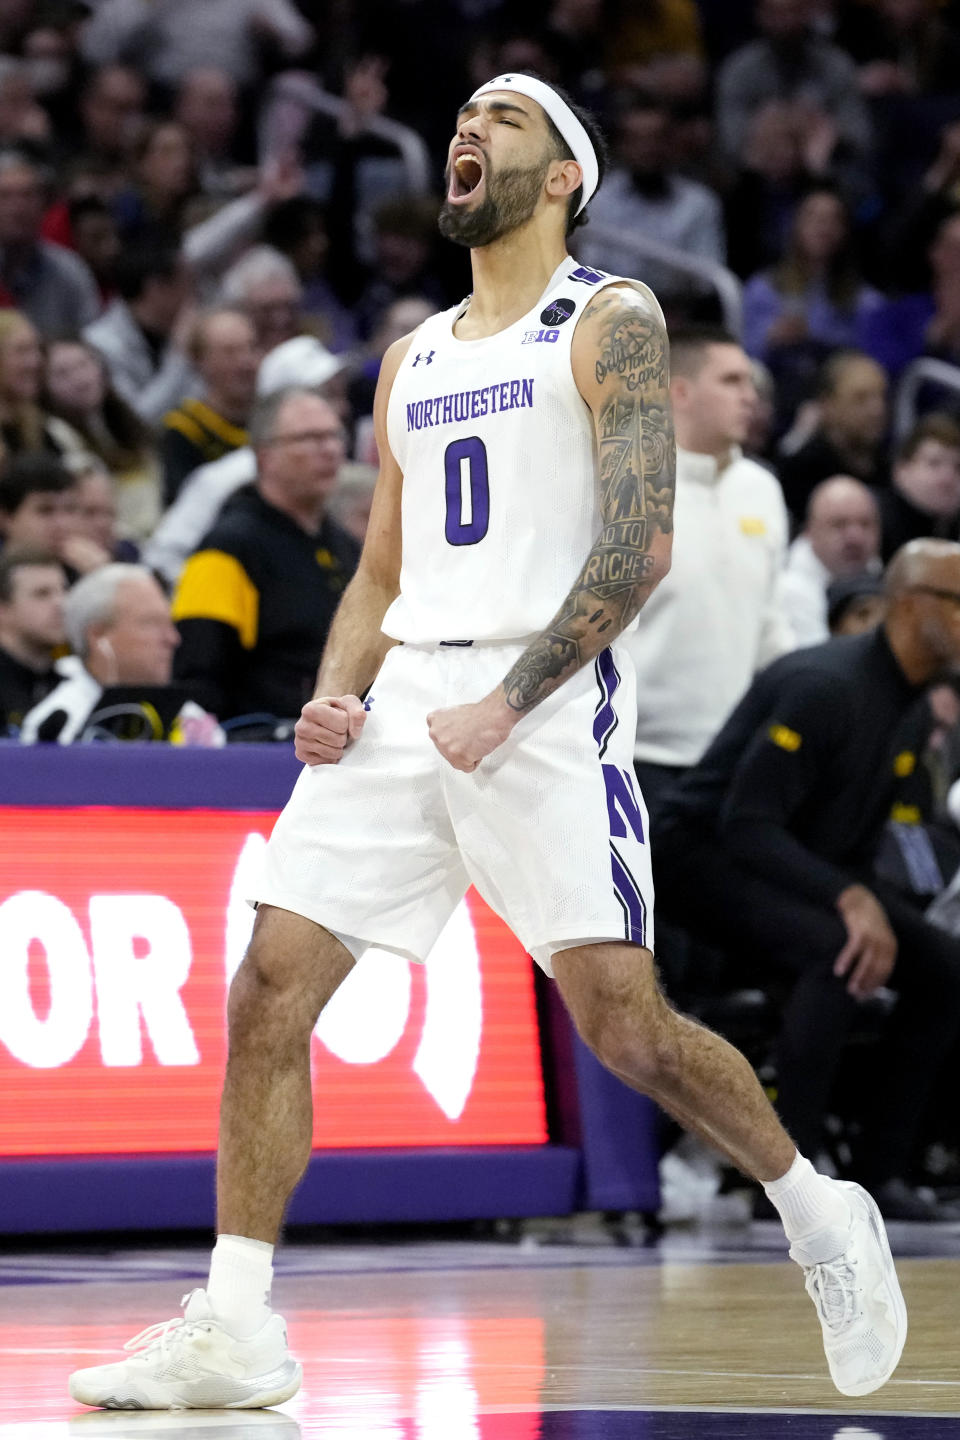 Northwestern guard Boo Buie reacts after a 3-point basket against Iowa during the first half of an NCAA college basketball game in Evanston, Ill., Sunday, Feb. 19, 2023. (AP Photo/Nam Y. Huh)